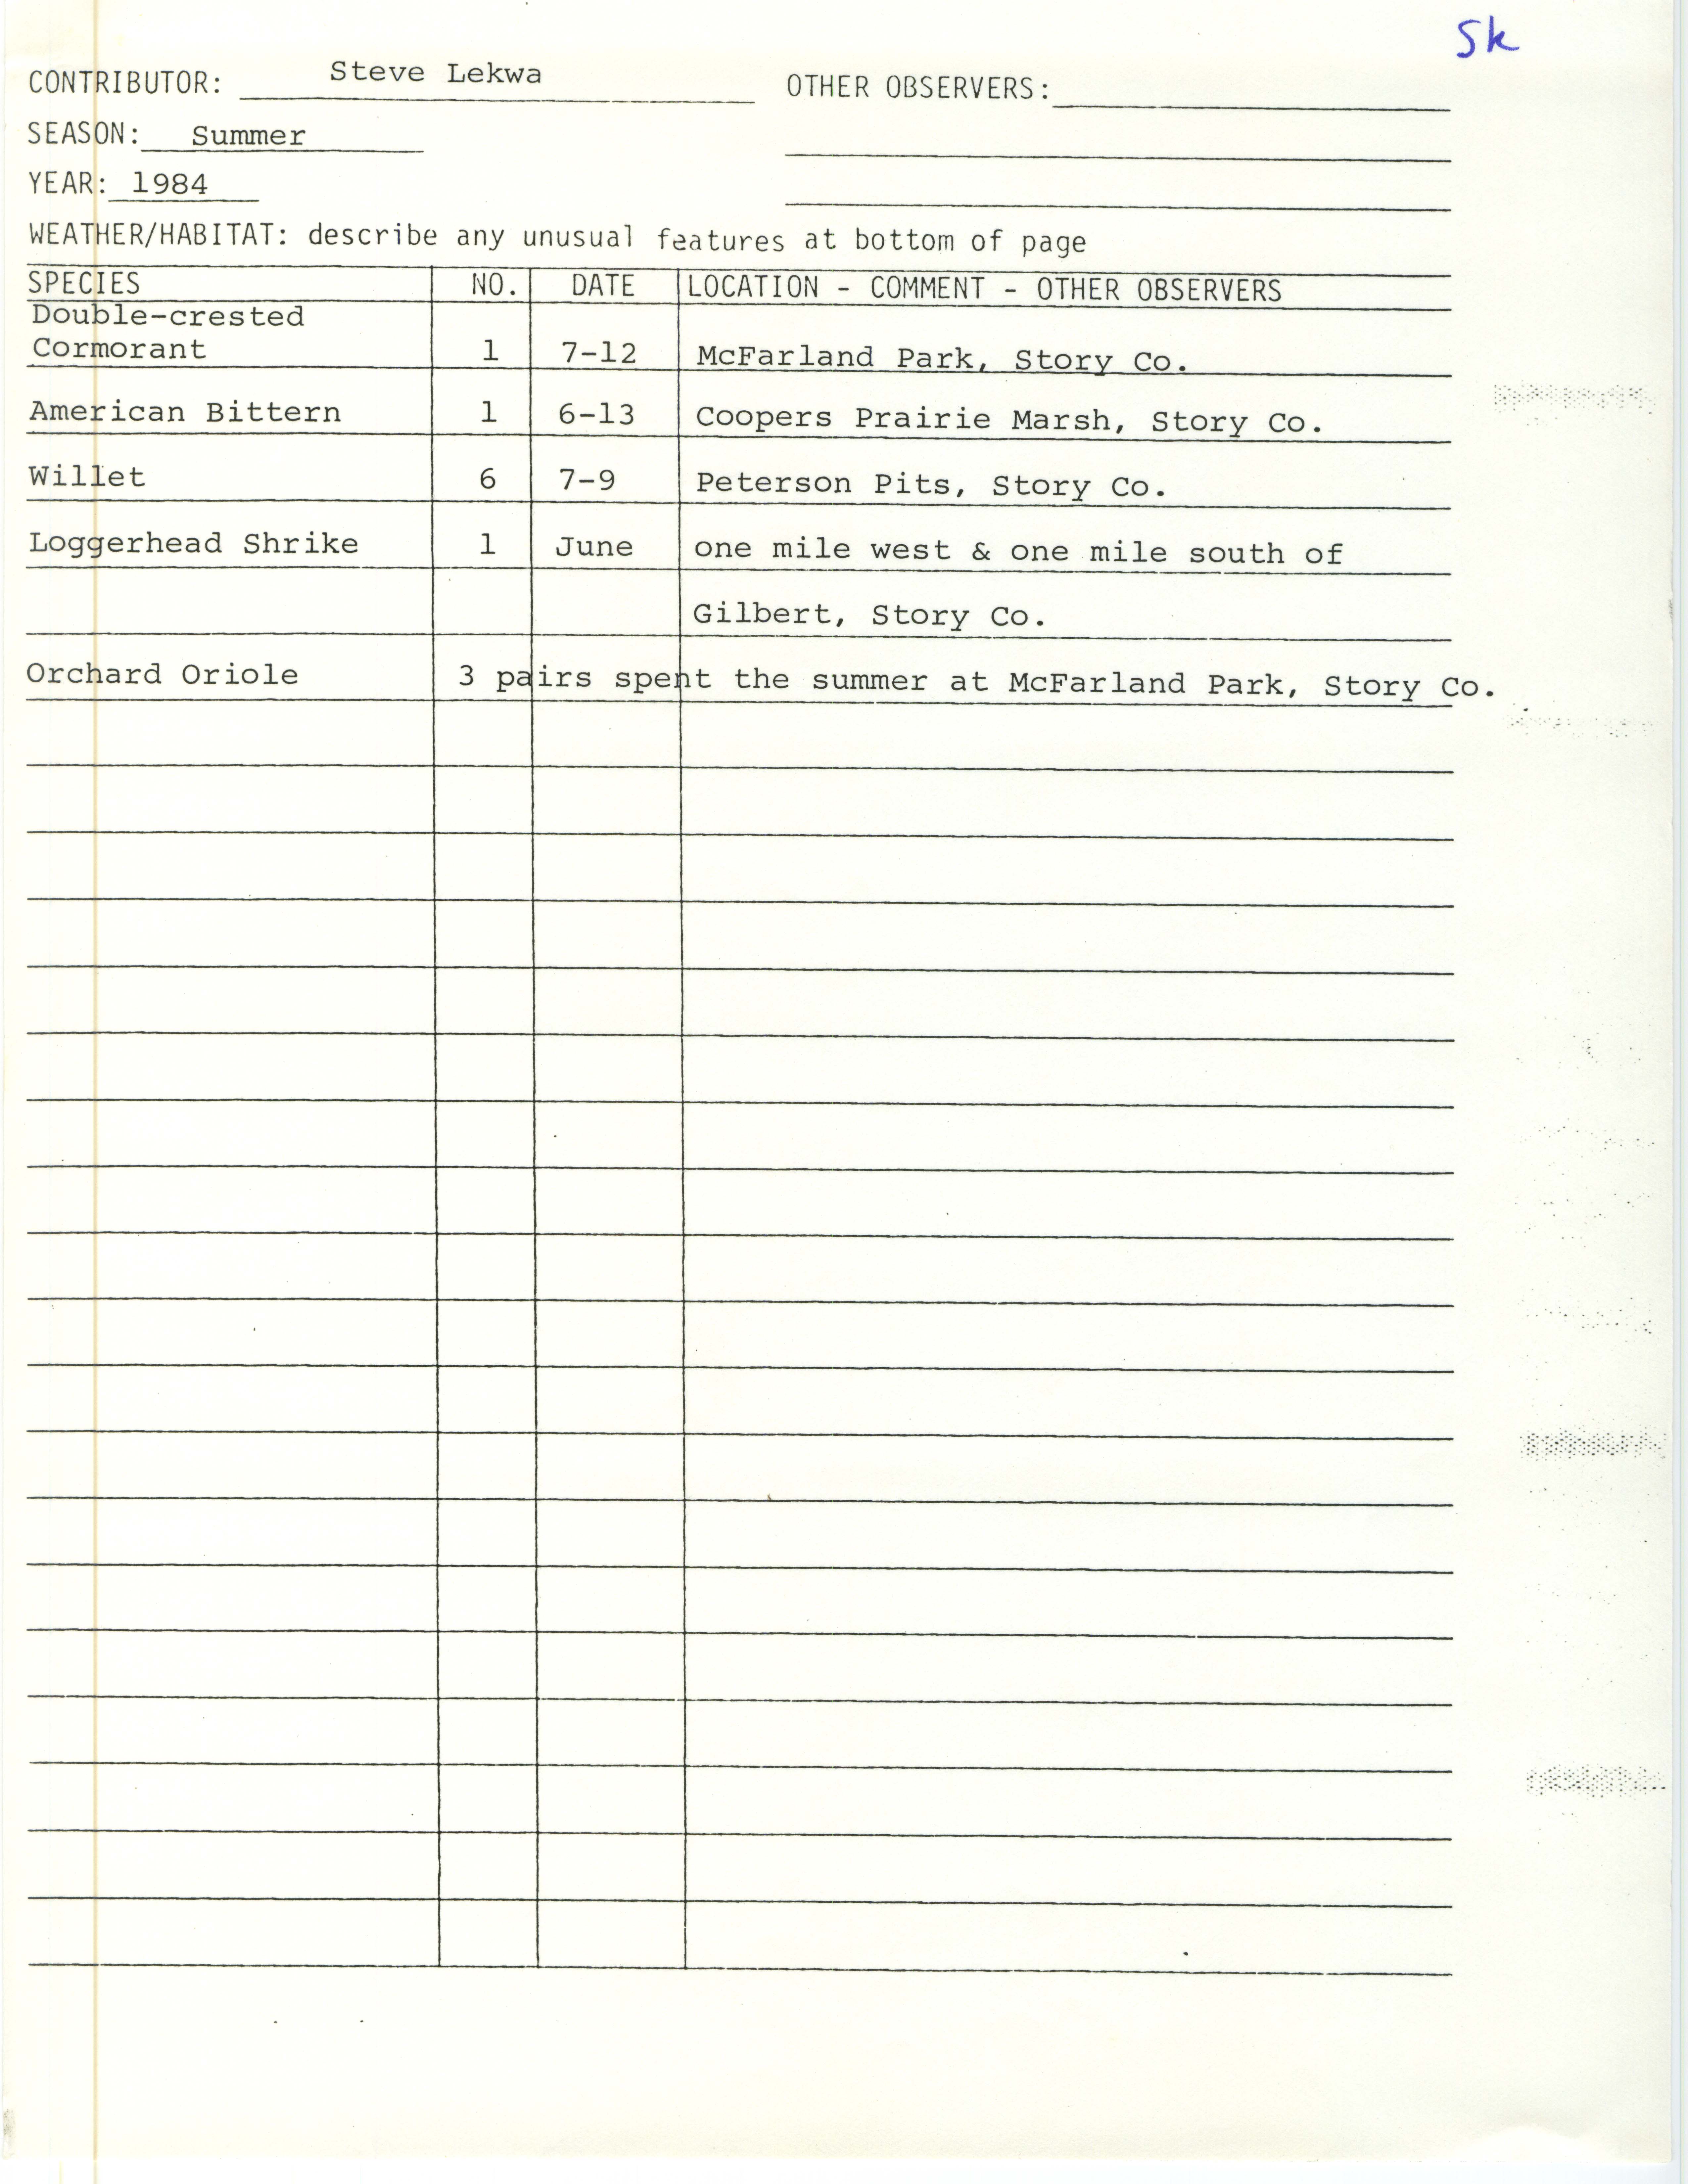 Field notes contributed by Steve Lekwa, summer 1984